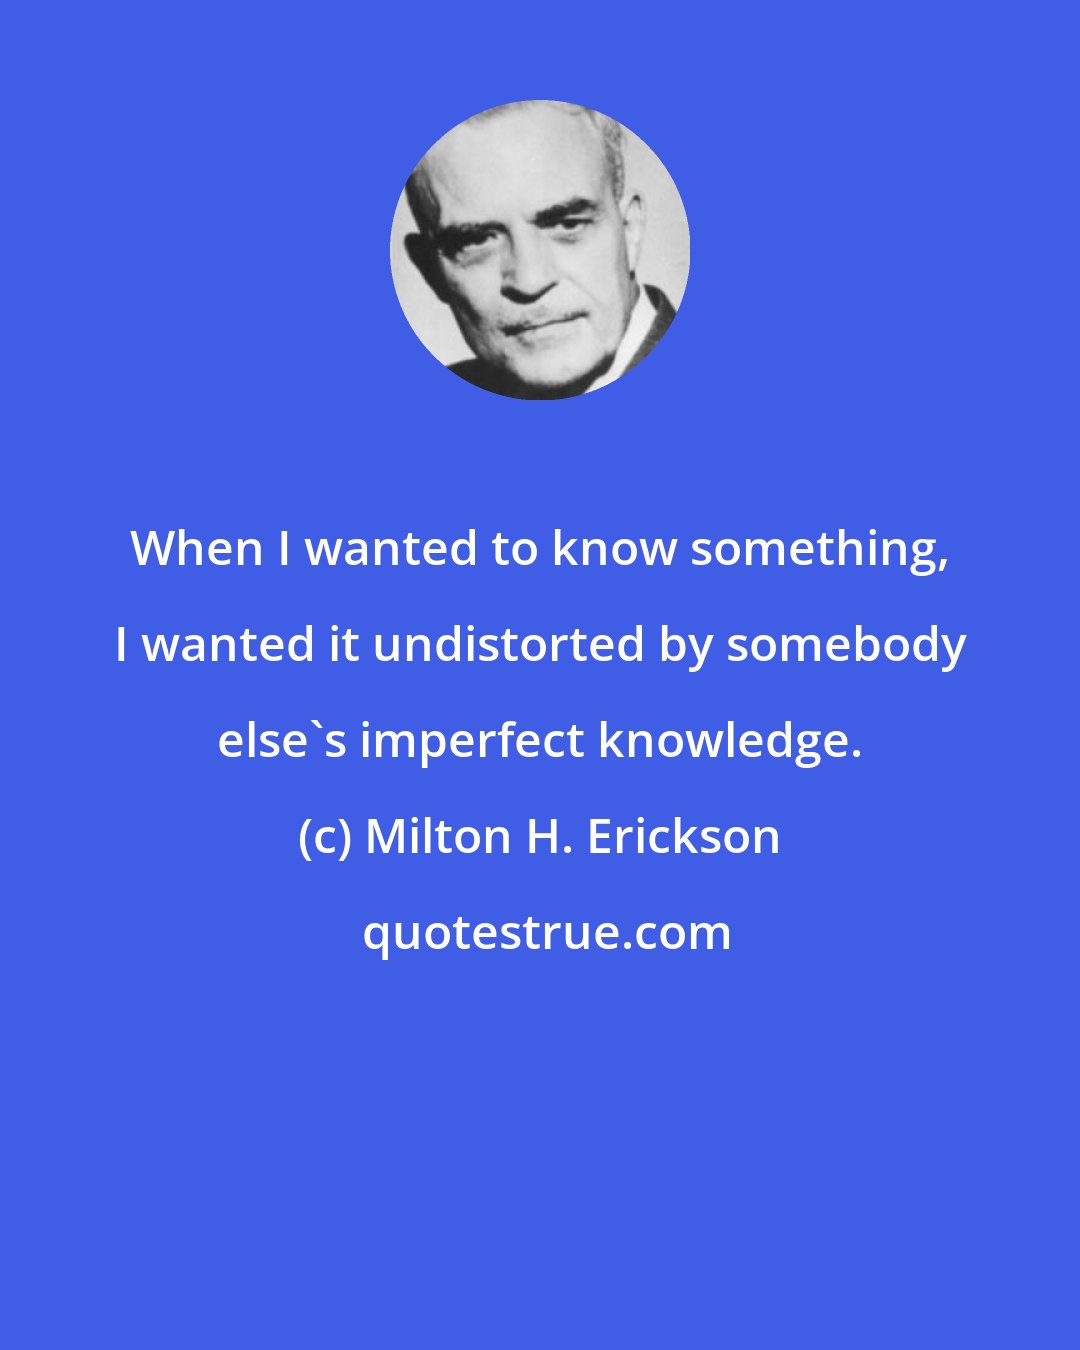 Milton H. Erickson: When I wanted to know something, I wanted it undistorted by somebody else's imperfect knowledge.